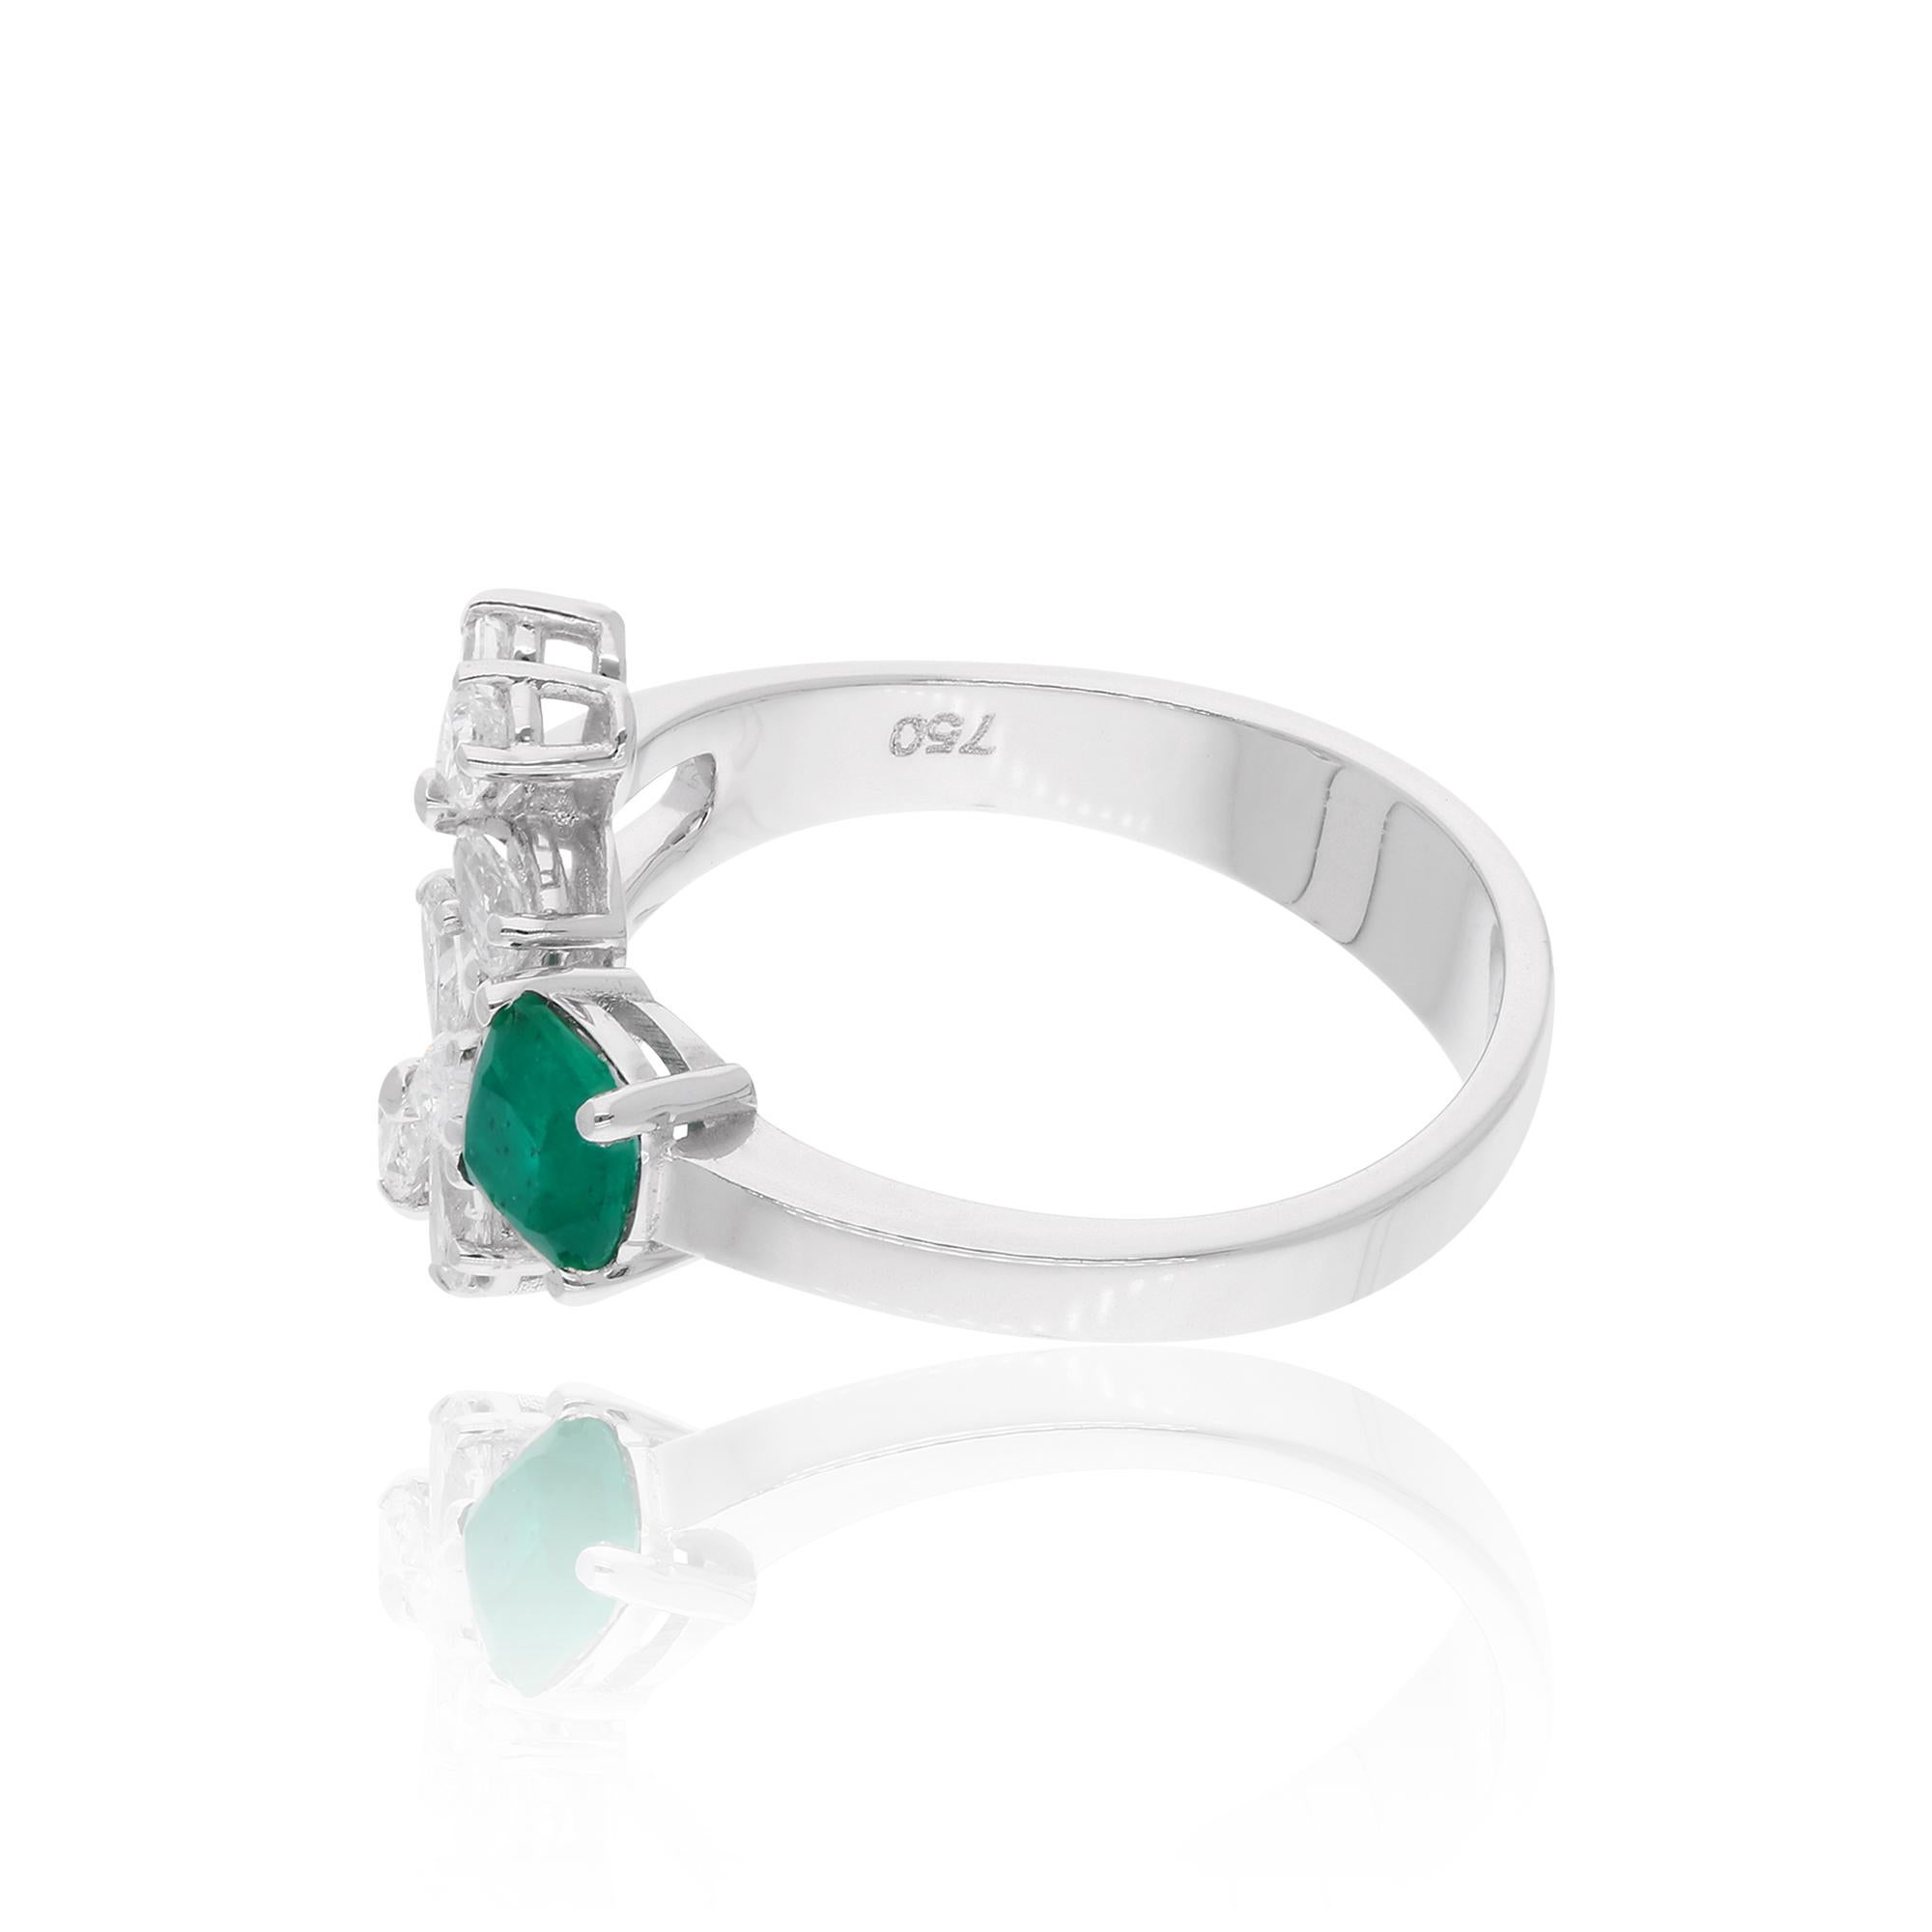 Item Code :- SER-22857
Gross Wt. :- 4.25 gm
18k Solid White Gold Wt. :- 4.04 gm
Natural Diamond Wt. :- 0.55 Ct. ( AVERAGE DIAMOND CLARITY SI1-SI2 & COLOR H-I )
Natural Emerald Wt. :- 0.52 Ct.
Ring Size :- 7 US & All size available

✦